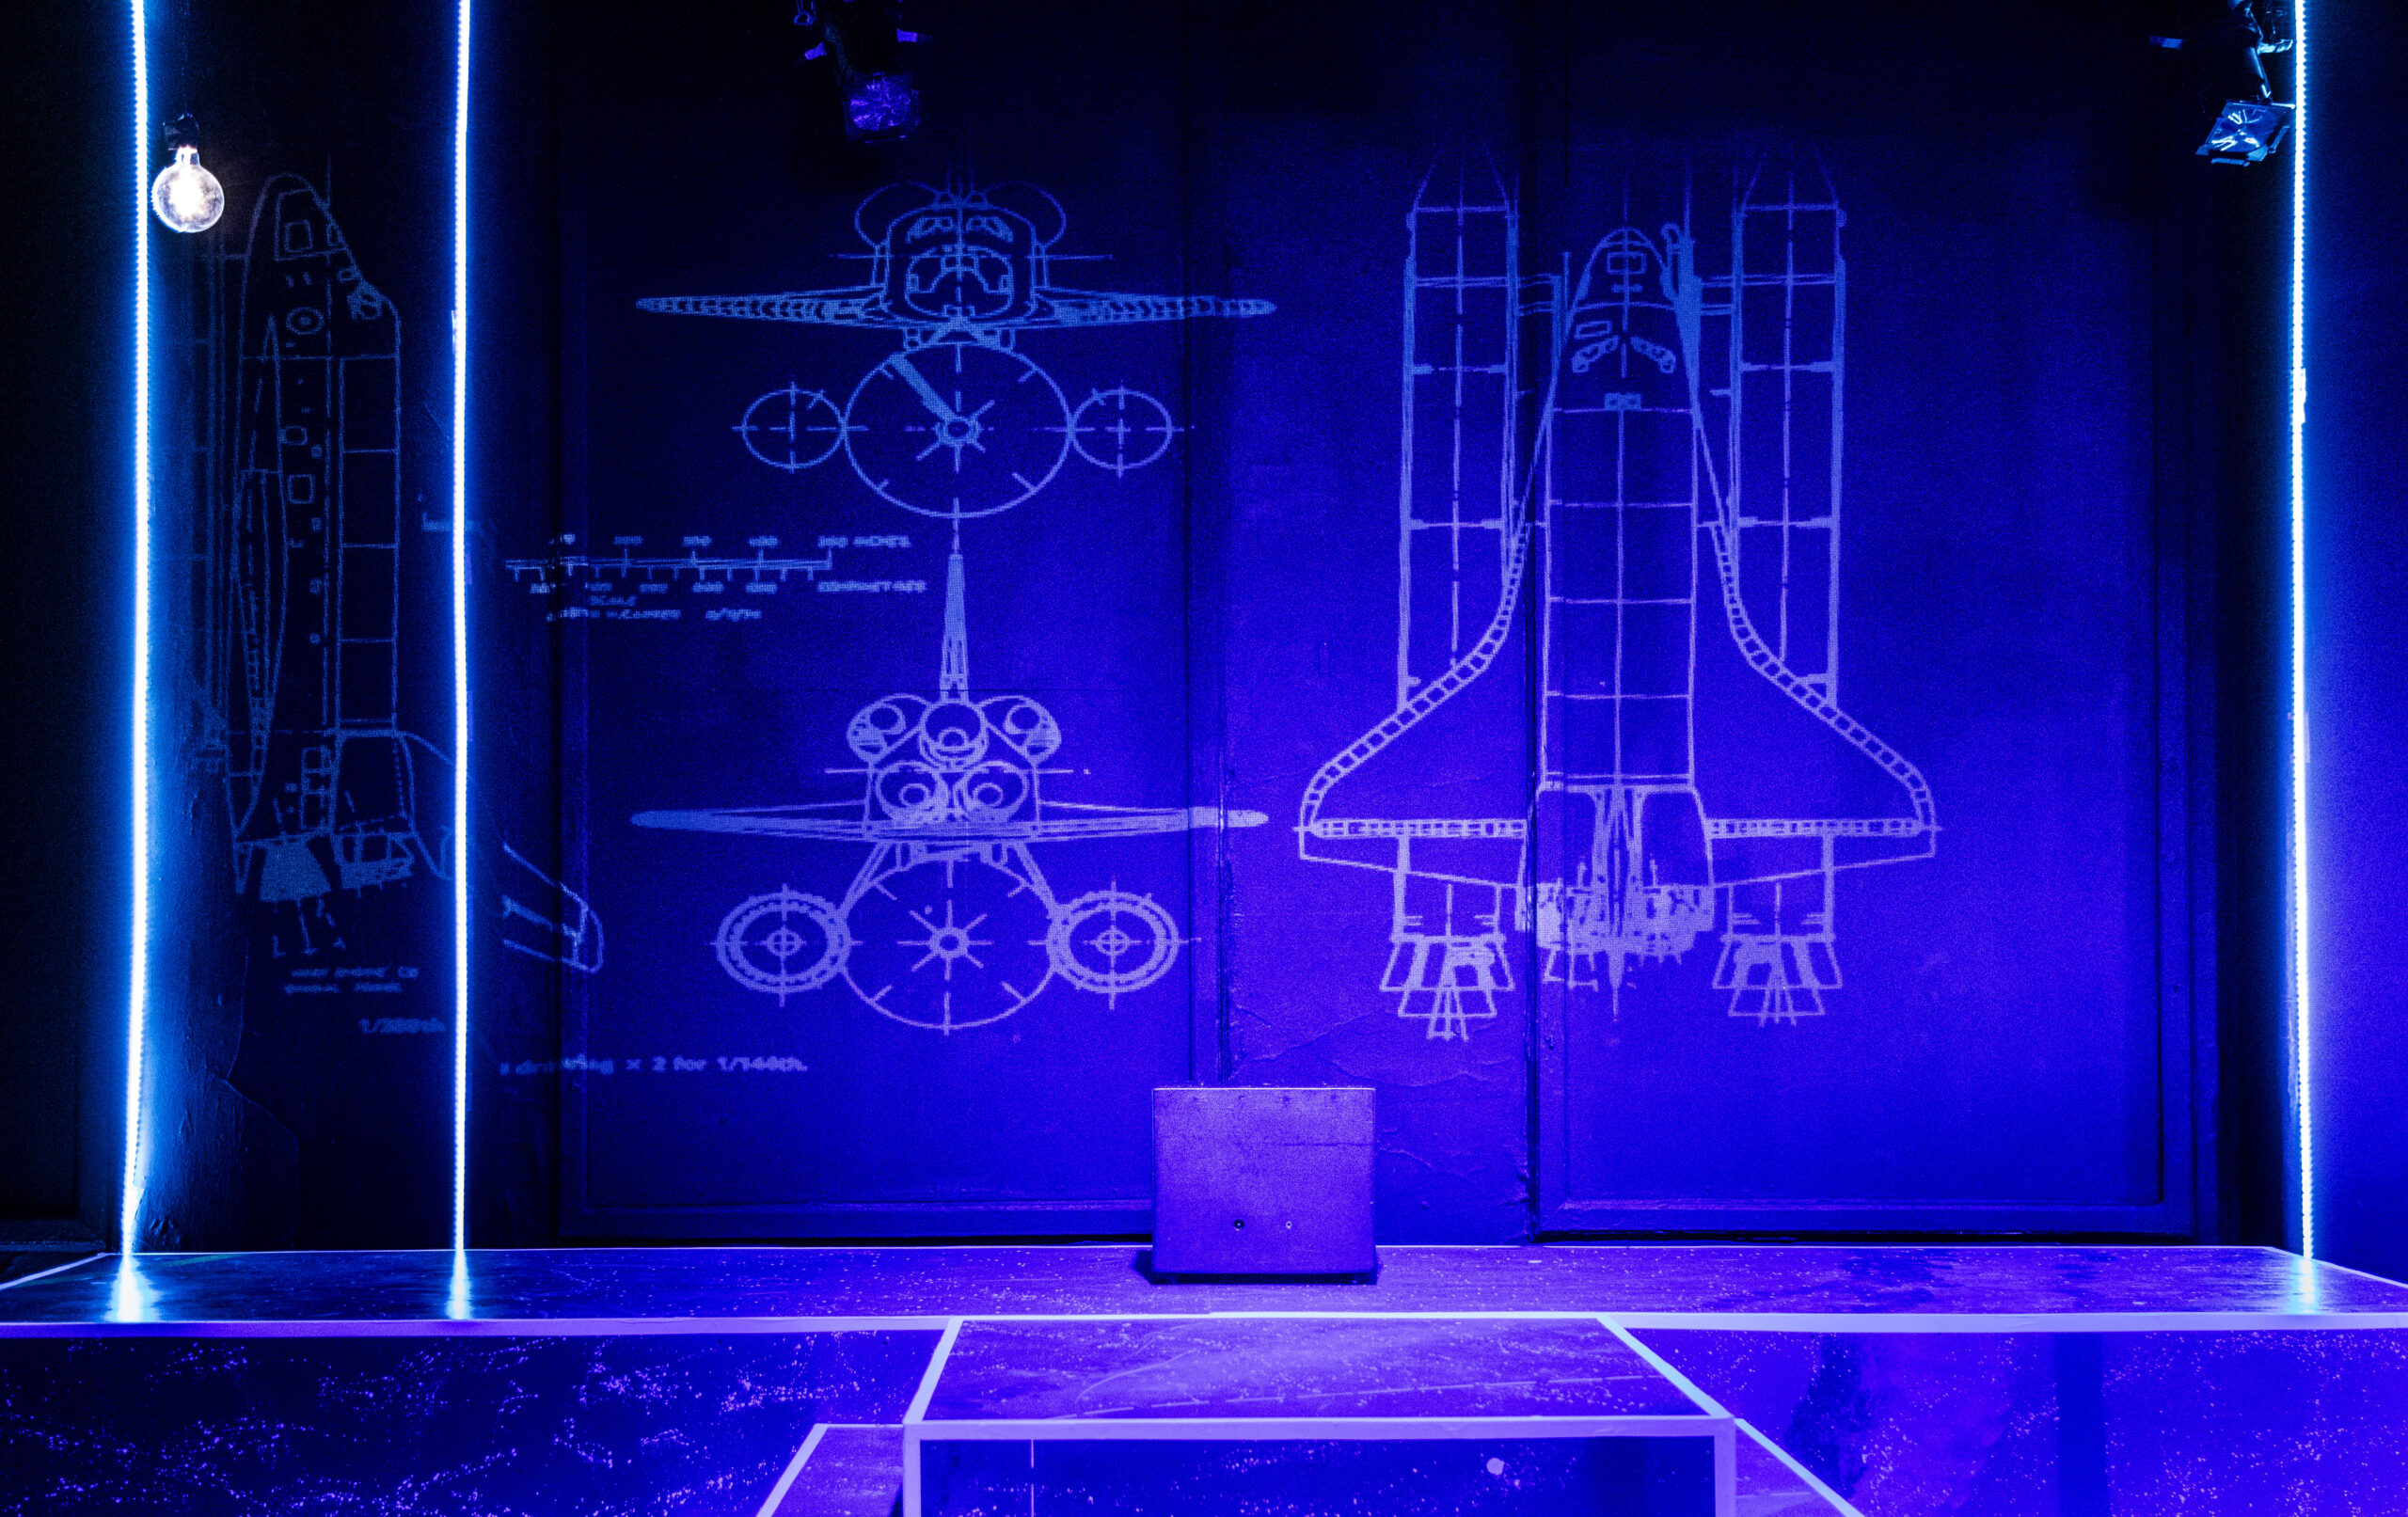 A projection of a spaceship on the stage’s backdrop for the production.